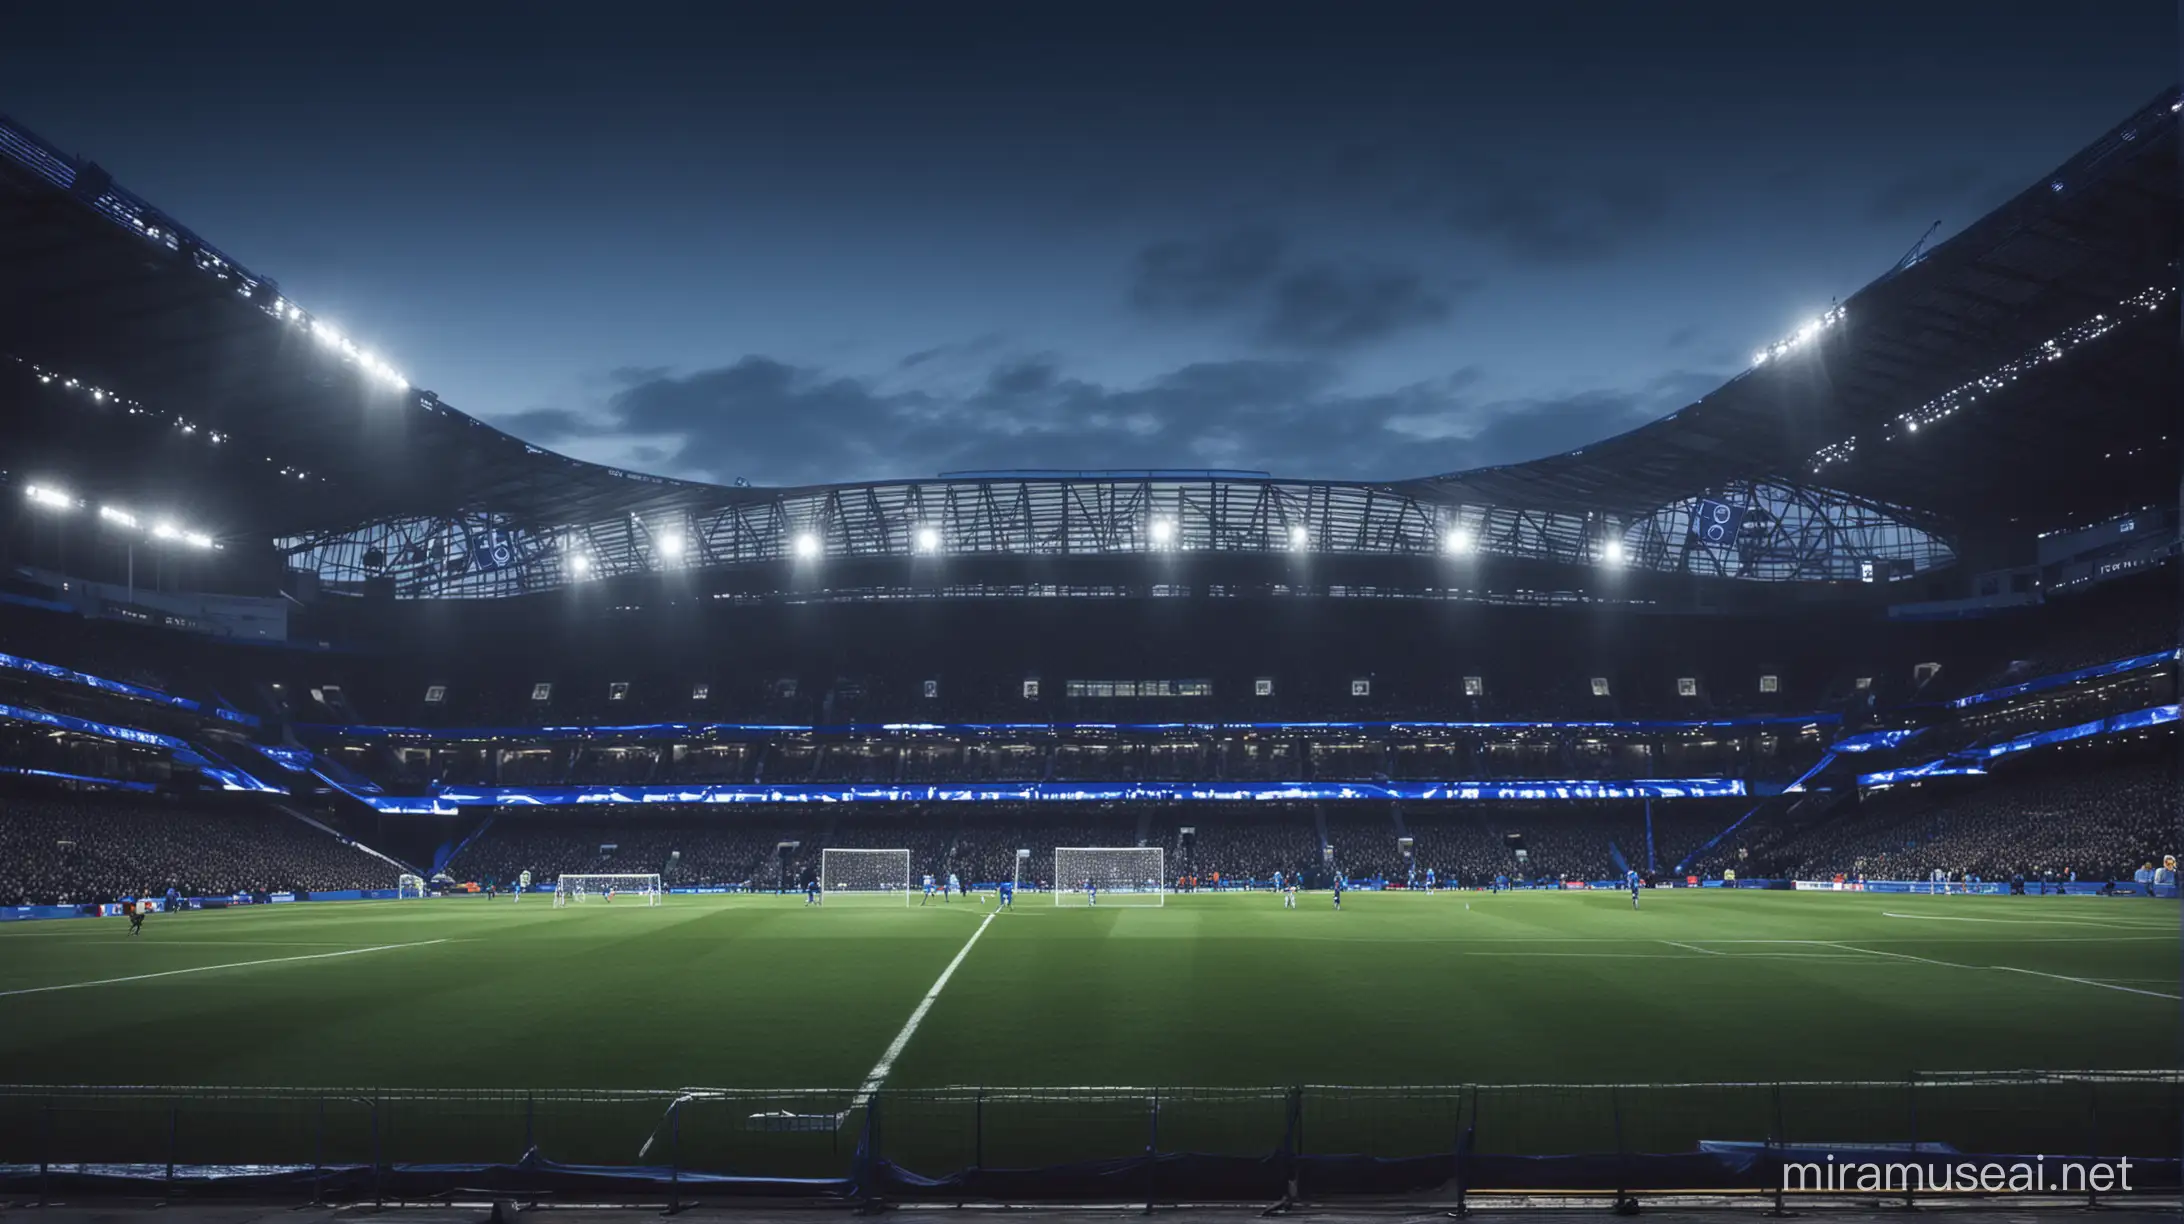 football staidum in city at night wallpaper, base image of stamford bridge staidum
unique 
